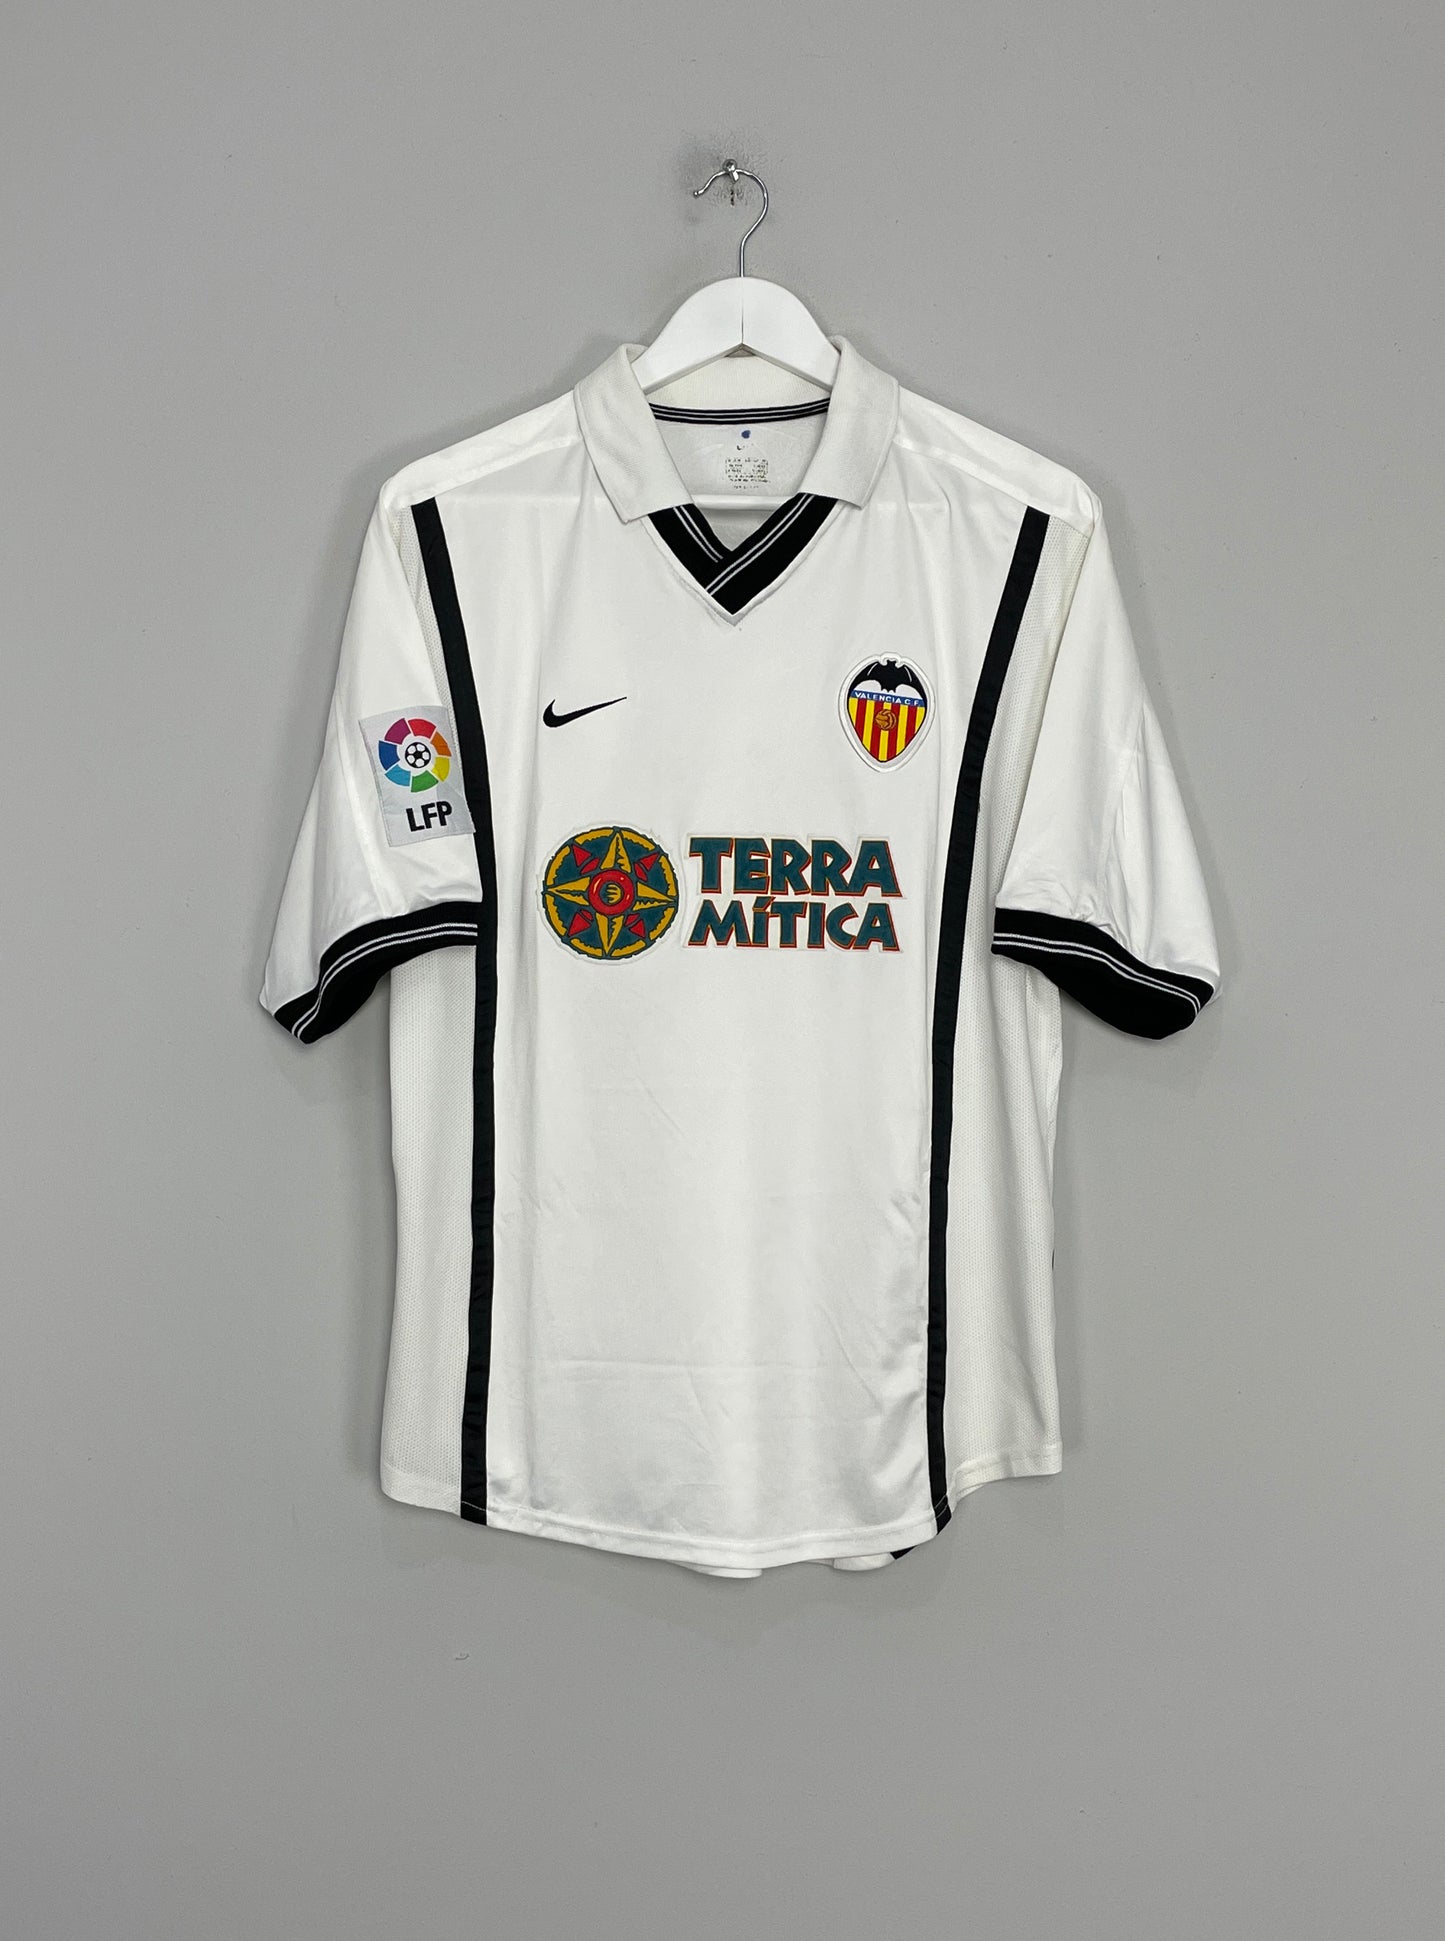 Image of the Valencia shirt from the 2000/01 season